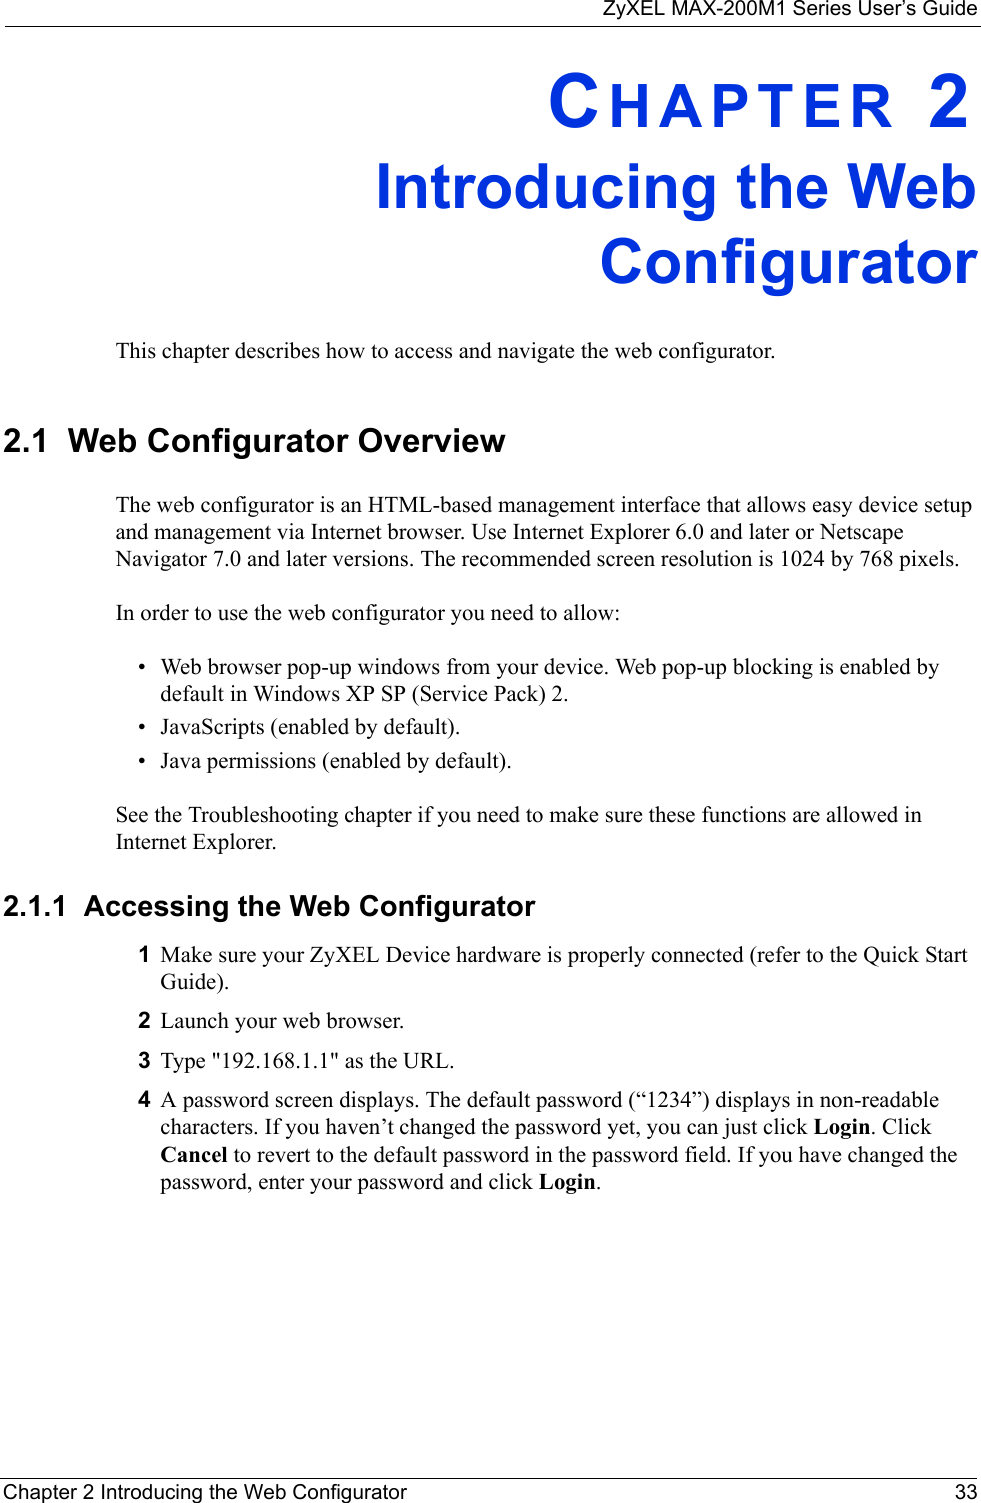 ZyXEL MAX-200M1 Series User’s GuideChapter 2 Introducing the Web Configurator 33CHAPTER 2Introducing the WebConfiguratorThis chapter describes how to access and navigate the web configurator.2.1  Web Configurator OverviewThe web configurator is an HTML-based management interface that allows easy device setup and management via Internet browser. Use Internet Explorer 6.0 and later or Netscape Navigator 7.0 and later versions. The recommended screen resolution is 1024 by 768 pixels.In order to use the web configurator you need to allow:• Web browser pop-up windows from your device. Web pop-up blocking is enabled by default in Windows XP SP (Service Pack) 2.• JavaScripts (enabled by default).• Java permissions (enabled by default).See the Troubleshooting chapter if you need to make sure these functions are allowed in Internet Explorer.2.1.1  Accessing the Web Configurator1Make sure your ZyXEL Device hardware is properly connected (refer to the Quick Start Guide).2Launch your web browser.3Type &quot;192.168.1.1&quot; as the URL.4A password screen displays. The default password (“1234”) displays in non-readable characters. If you haven’t changed the password yet, you can just click Login. Click Cancel to revert to the default password in the password field. If you have changed the password, enter your password and click Login. 